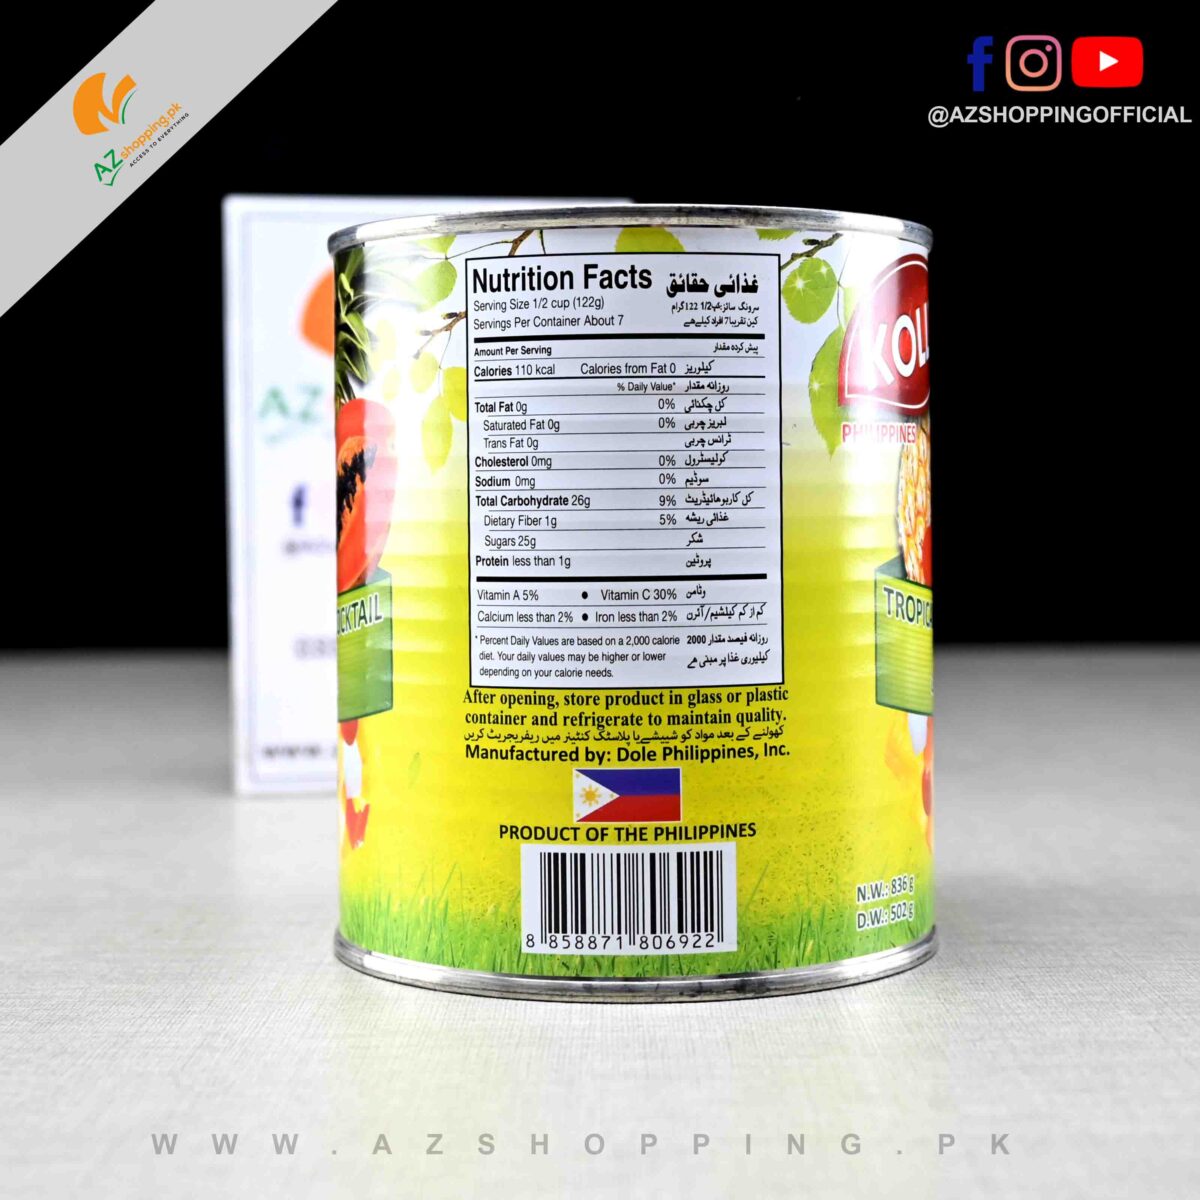 Kolly – Tropical Fruit Cocktail in Heavy Syrup - Net Weight: 836g